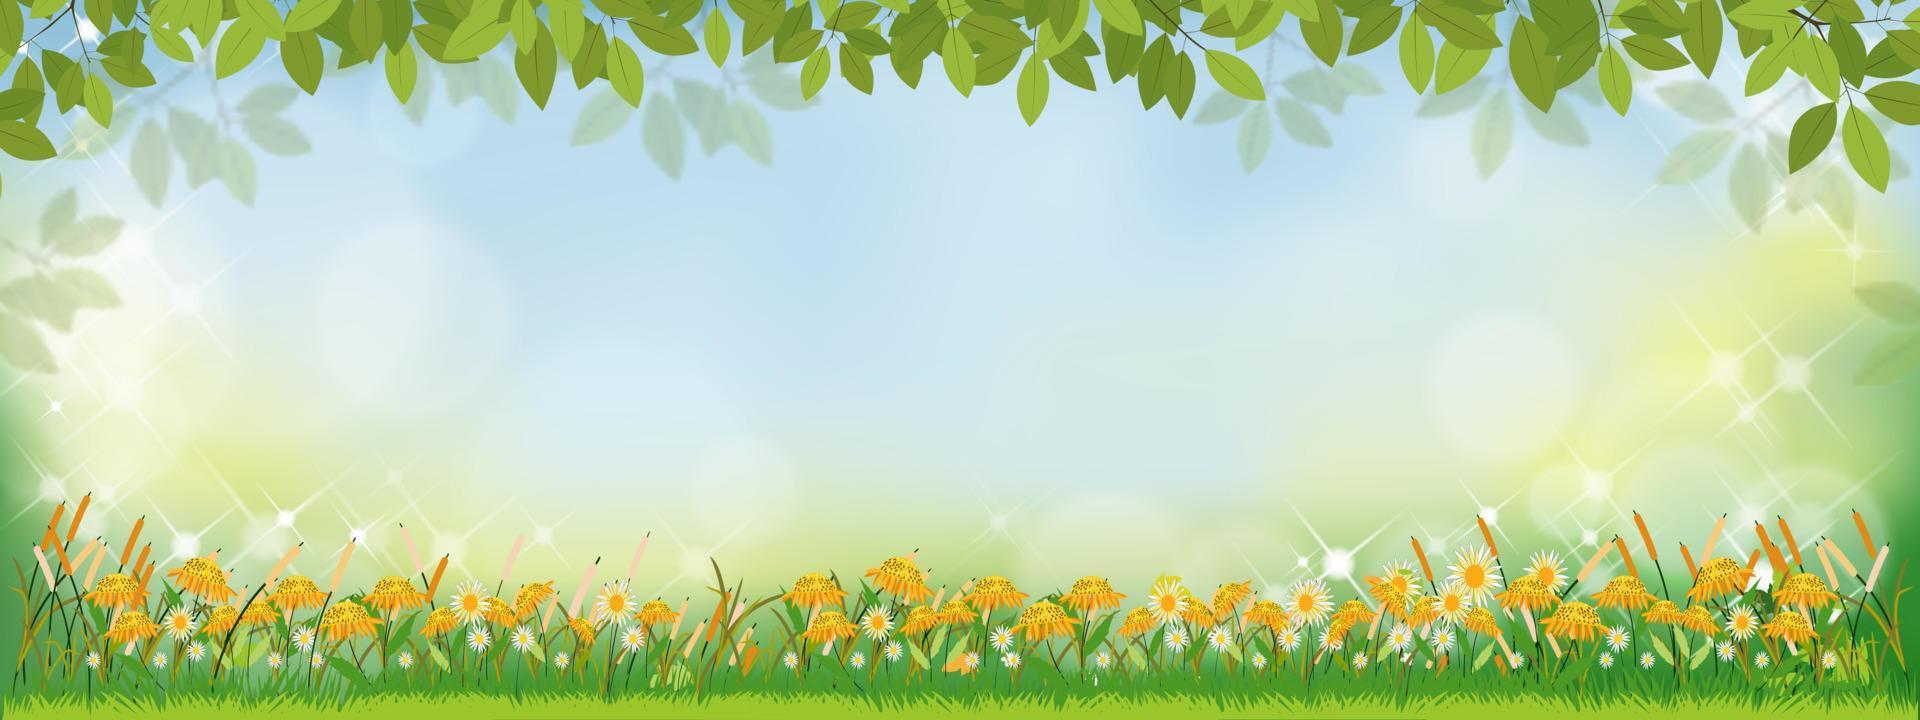 Vector Spring nature background with sunflowers and green grass field, Summer background with branches leave on boarder and blurry bokeh light effect. Template banner for Easter, Spring,Summer concept